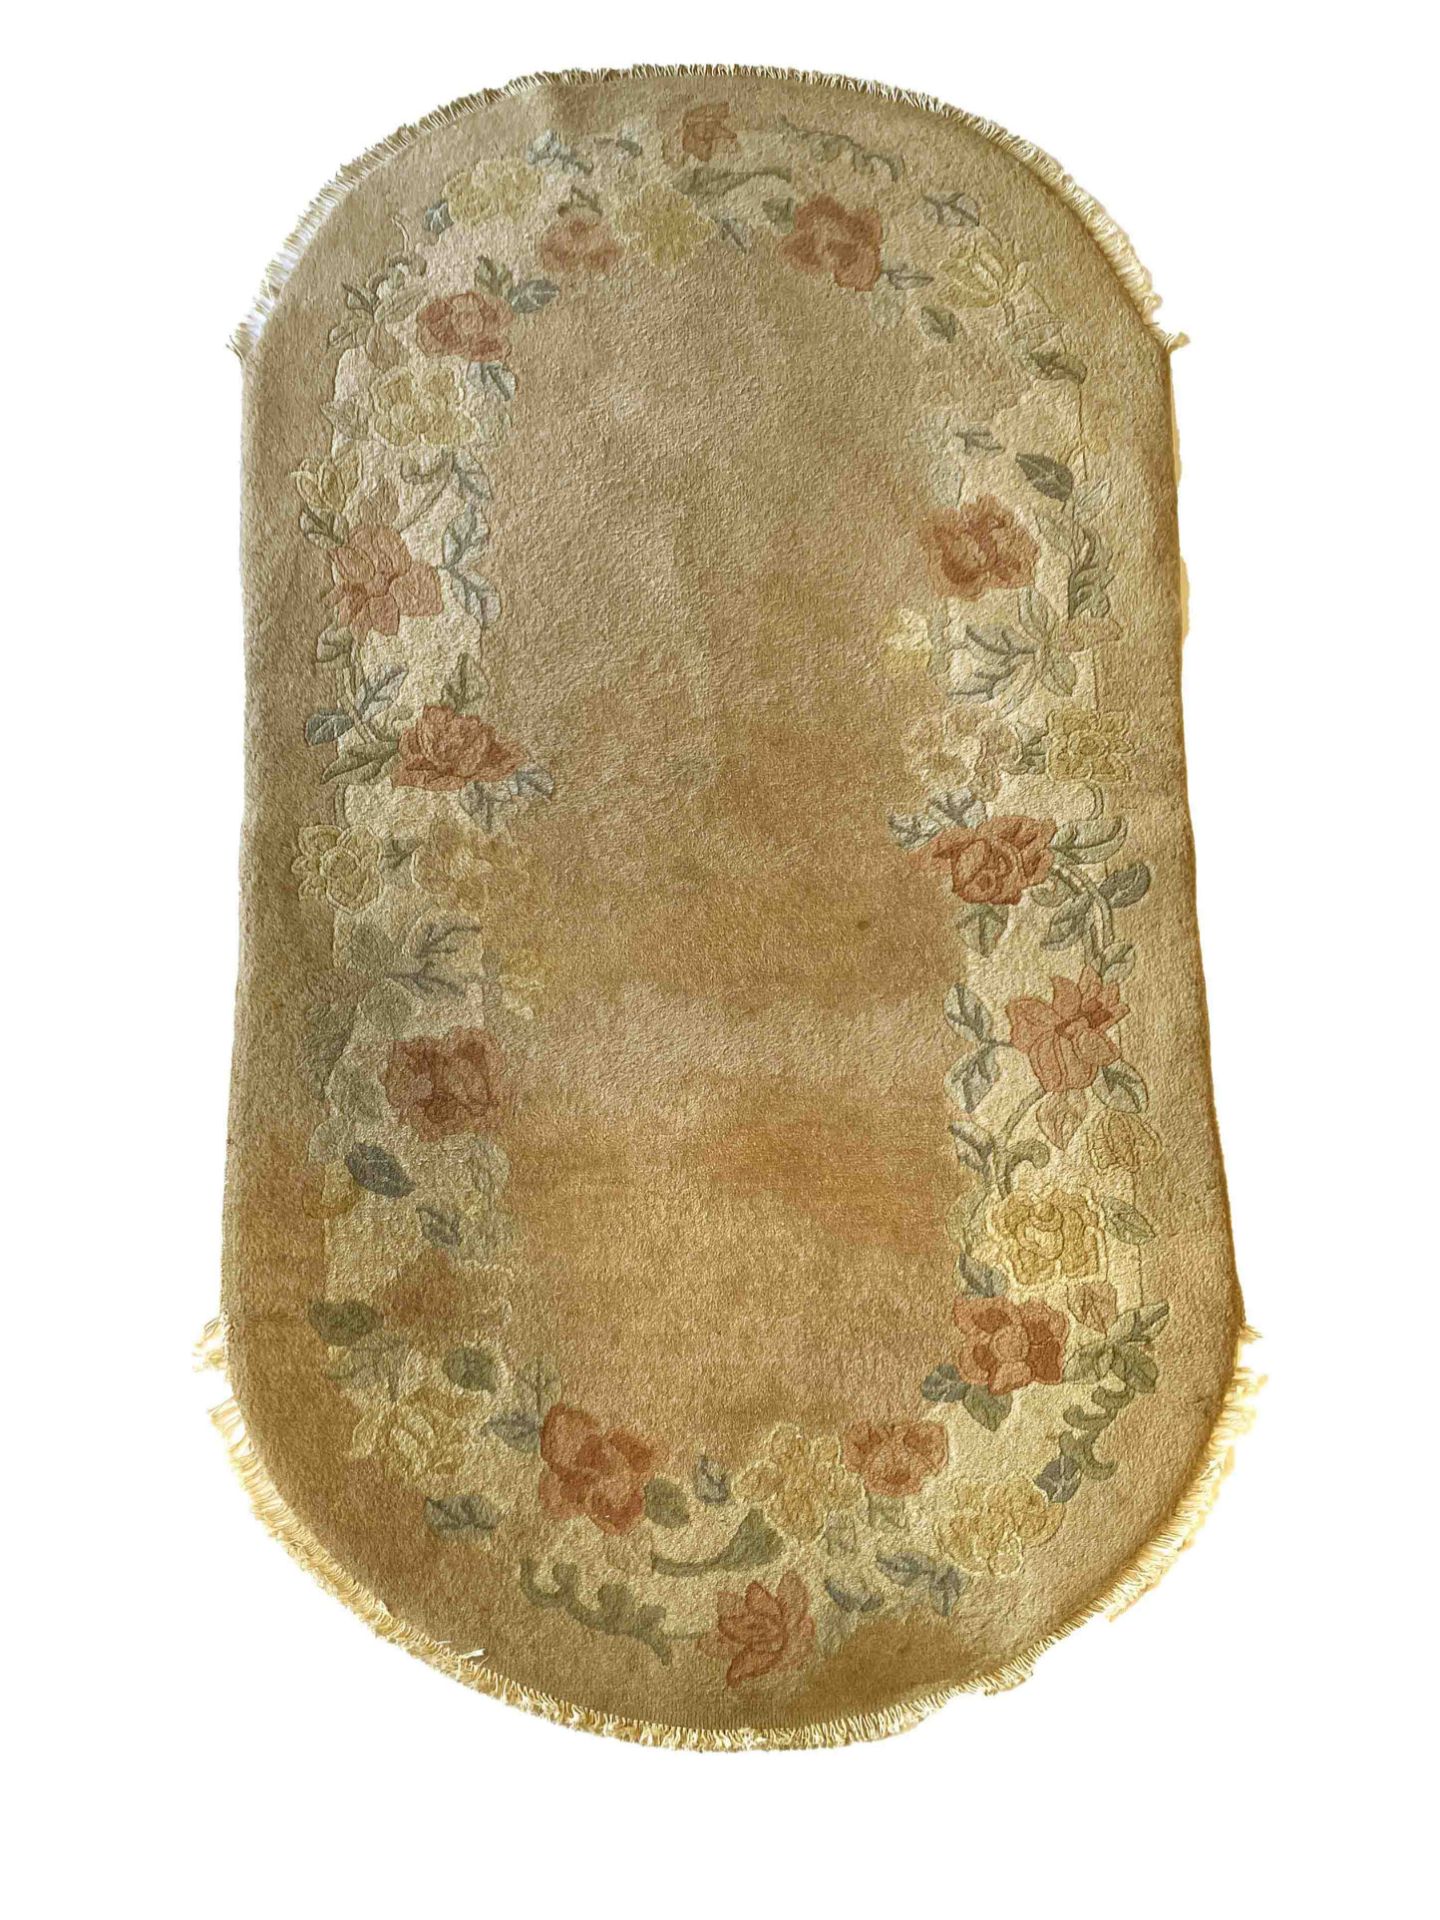 Carpet, China, minor wear, 180 x 90 cm - The carpet can only be viewed and collected at another